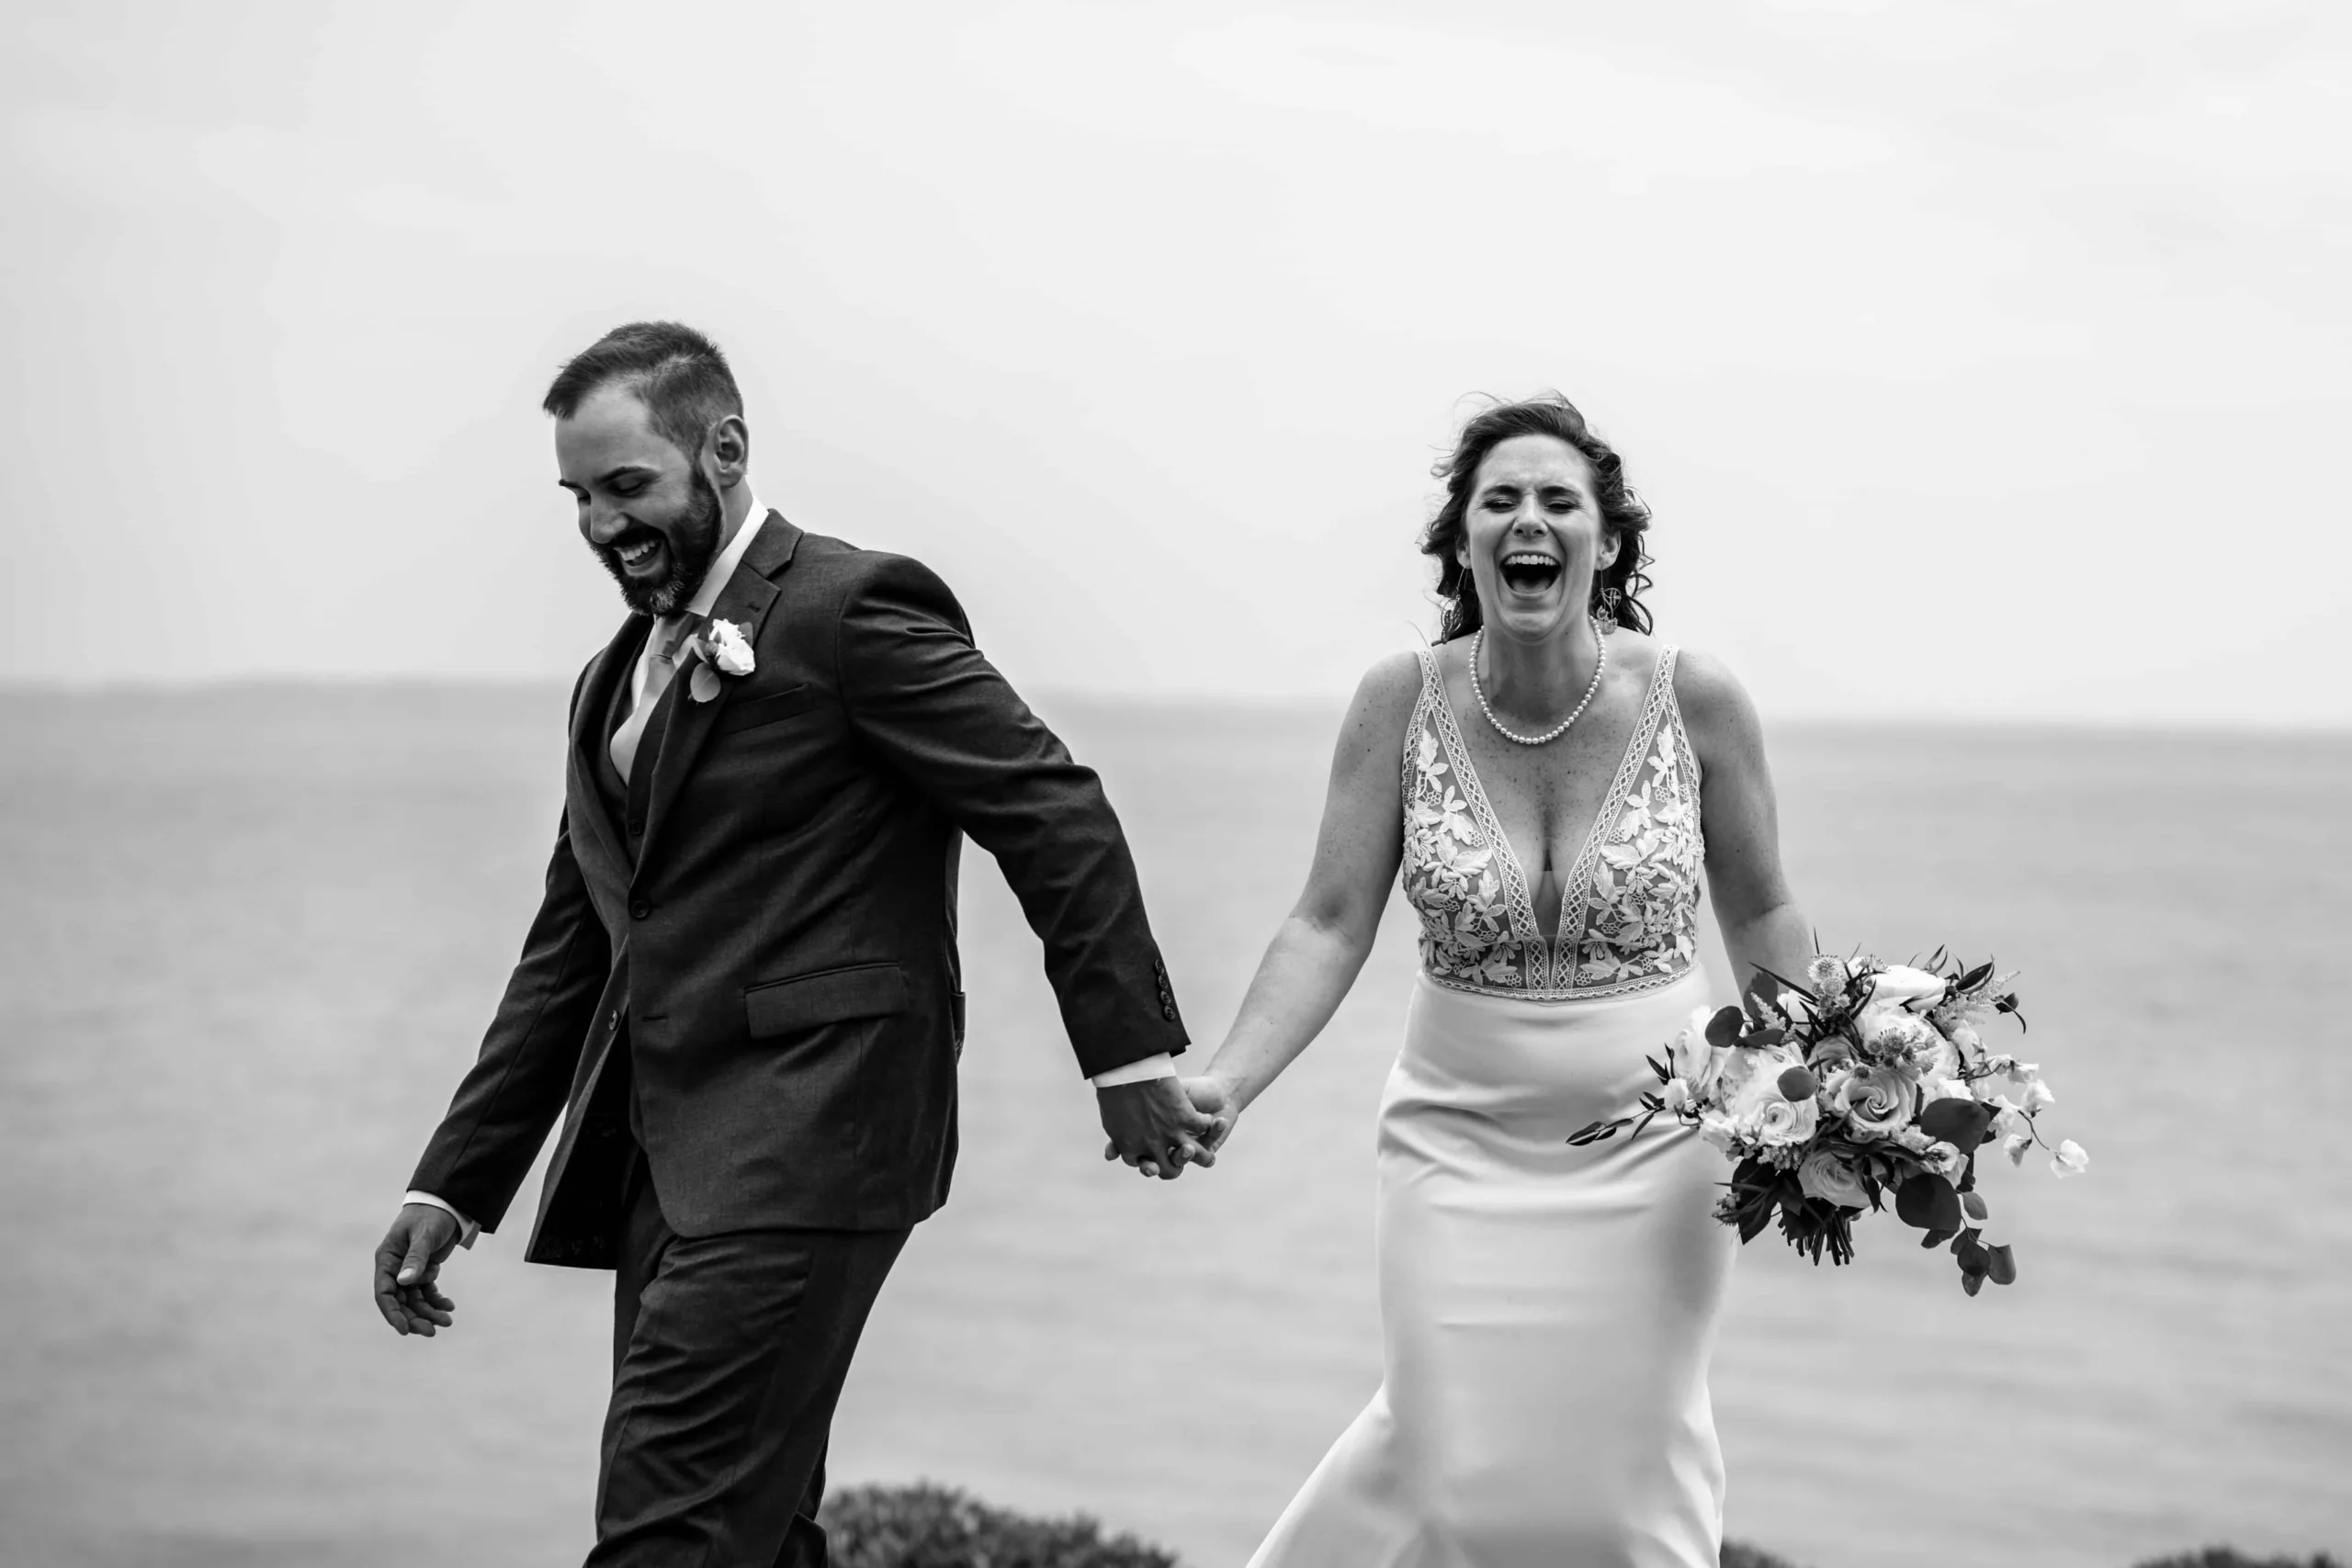 A laughing couple in wedding attire, holding hands as they walk.